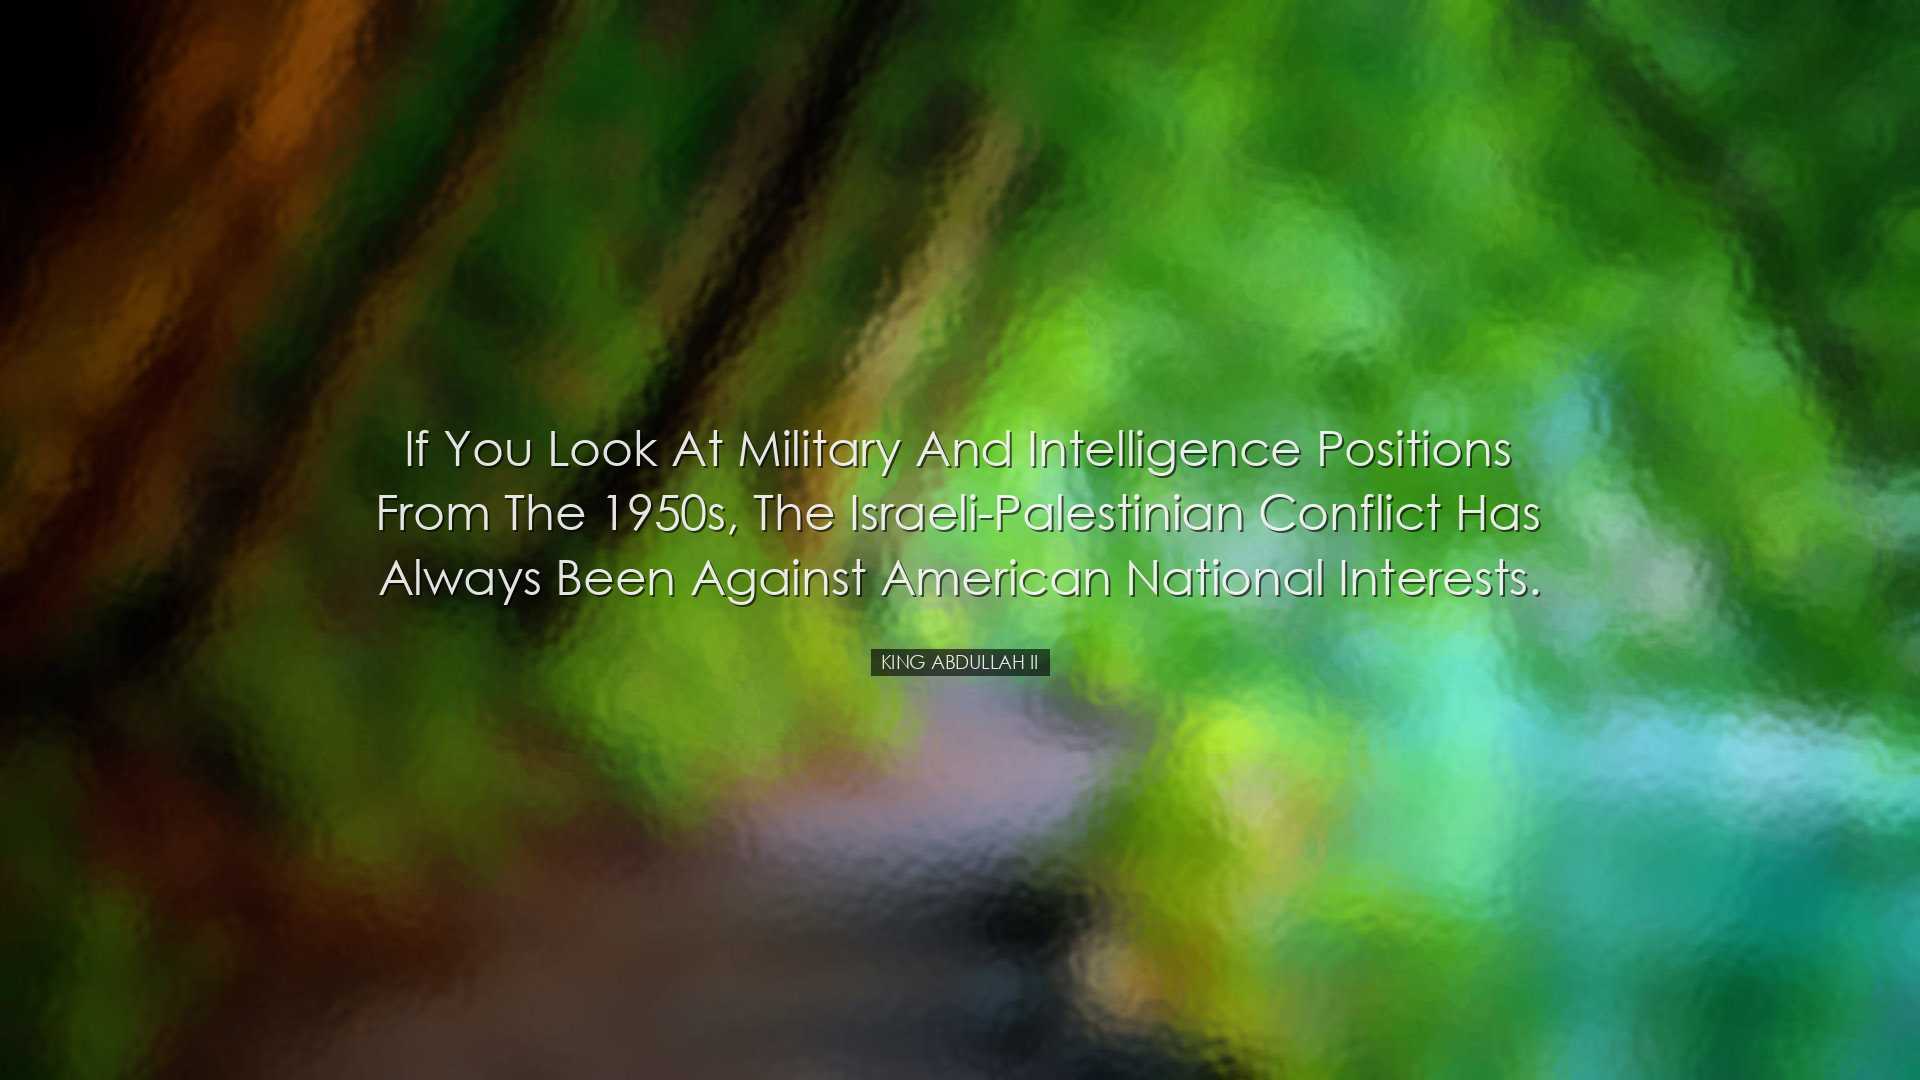 If you look at military and intelligence positions from the 1950s,